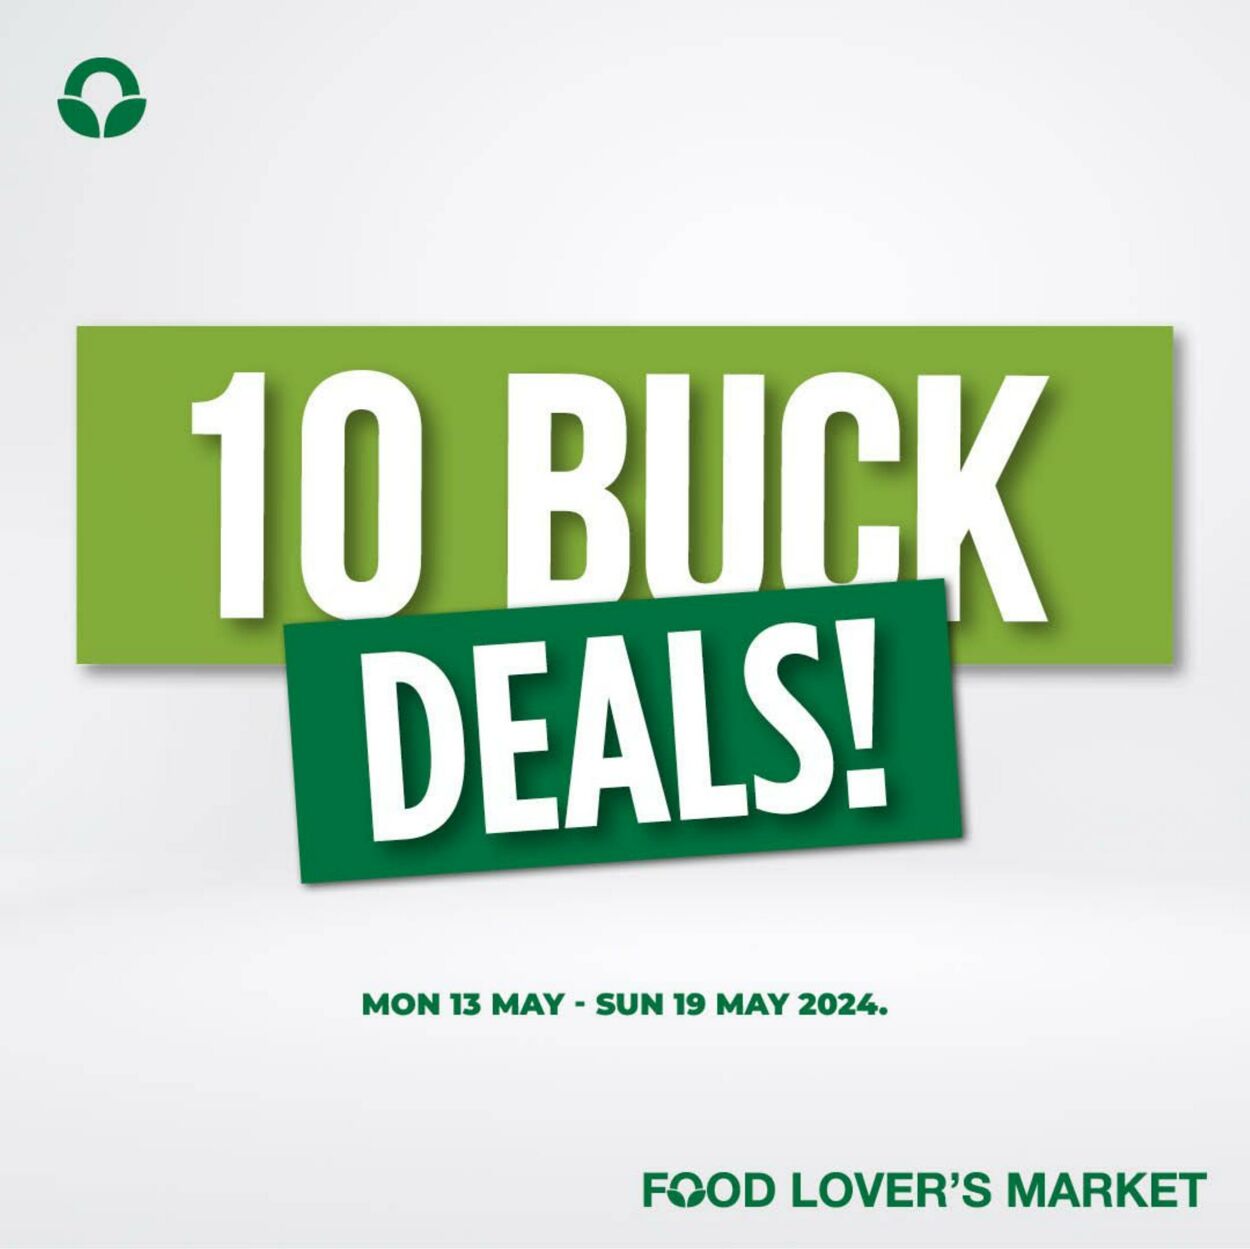 Food Lovers Market Promotional specials